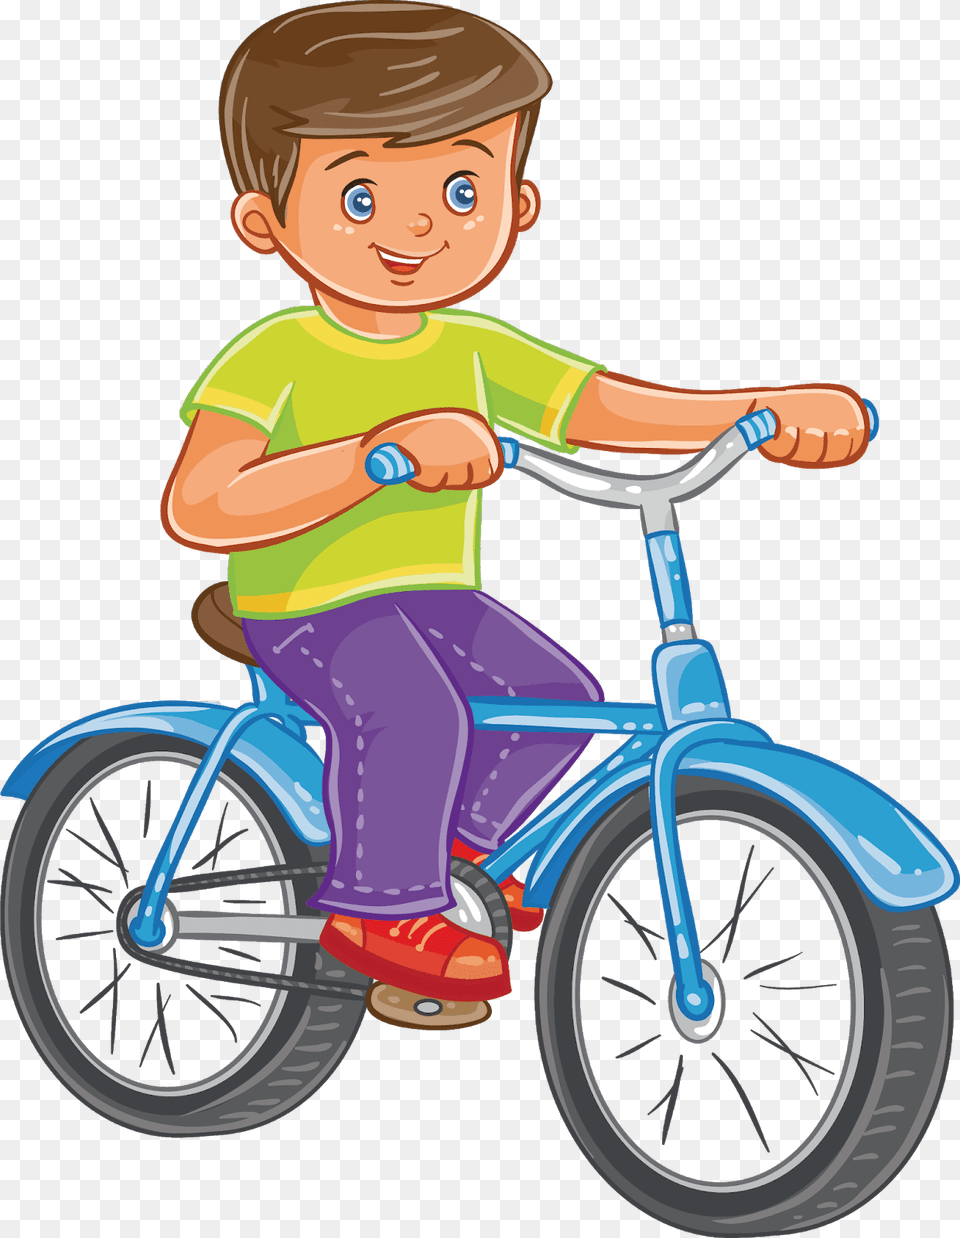 Bicycle Cartoon, Baby, Person, Transportation, Vehicle Png Image